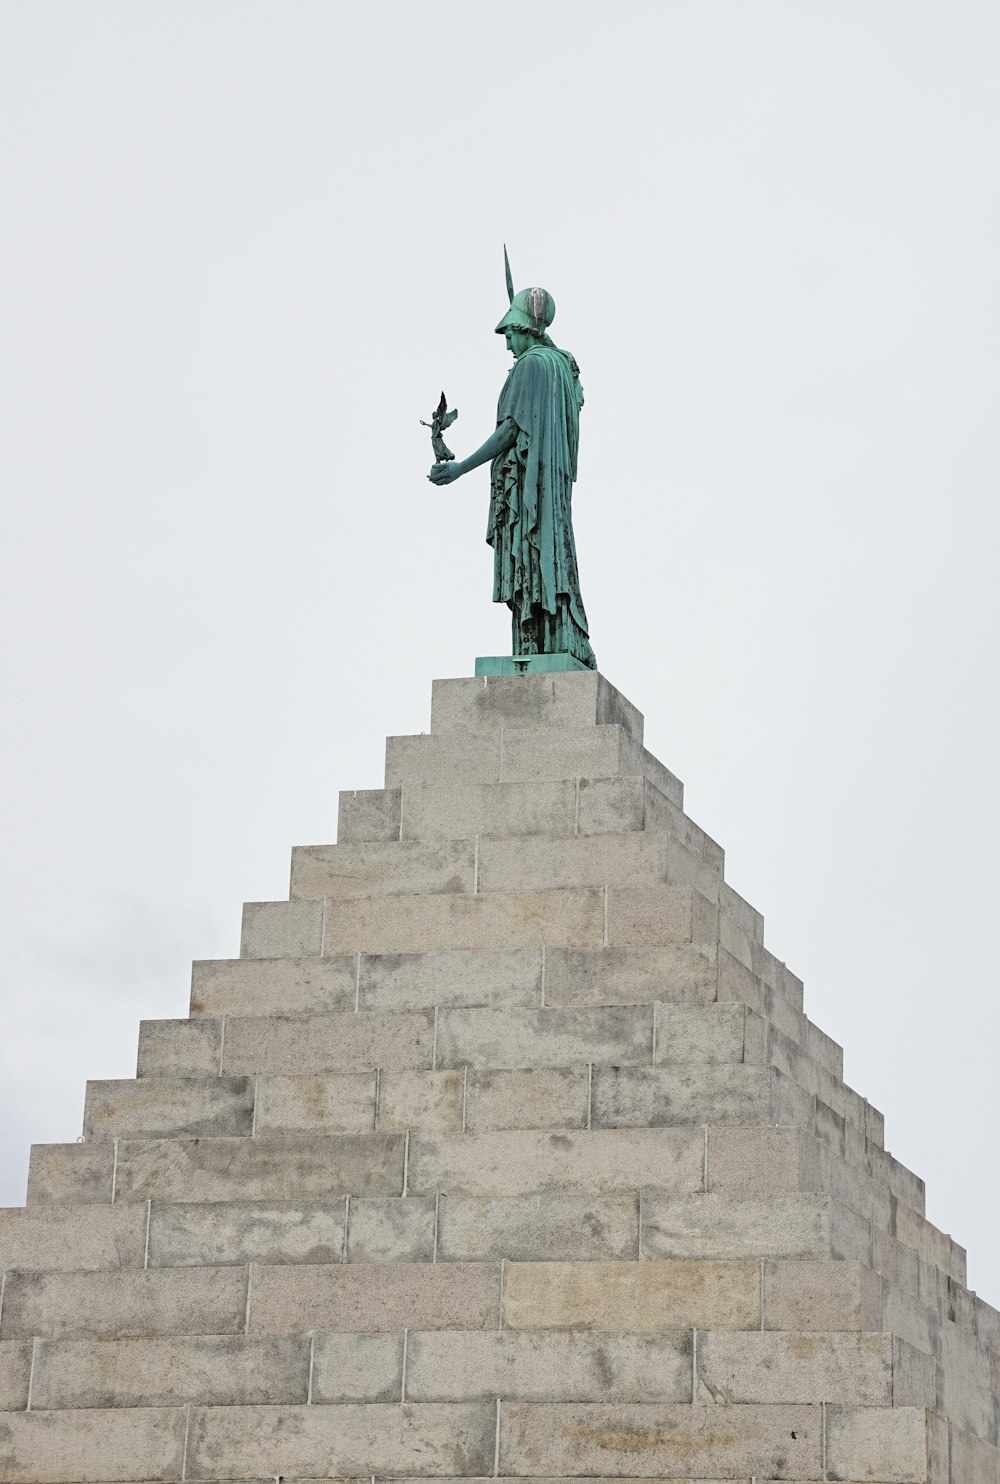 a statue of a man holding a bird on top of a building